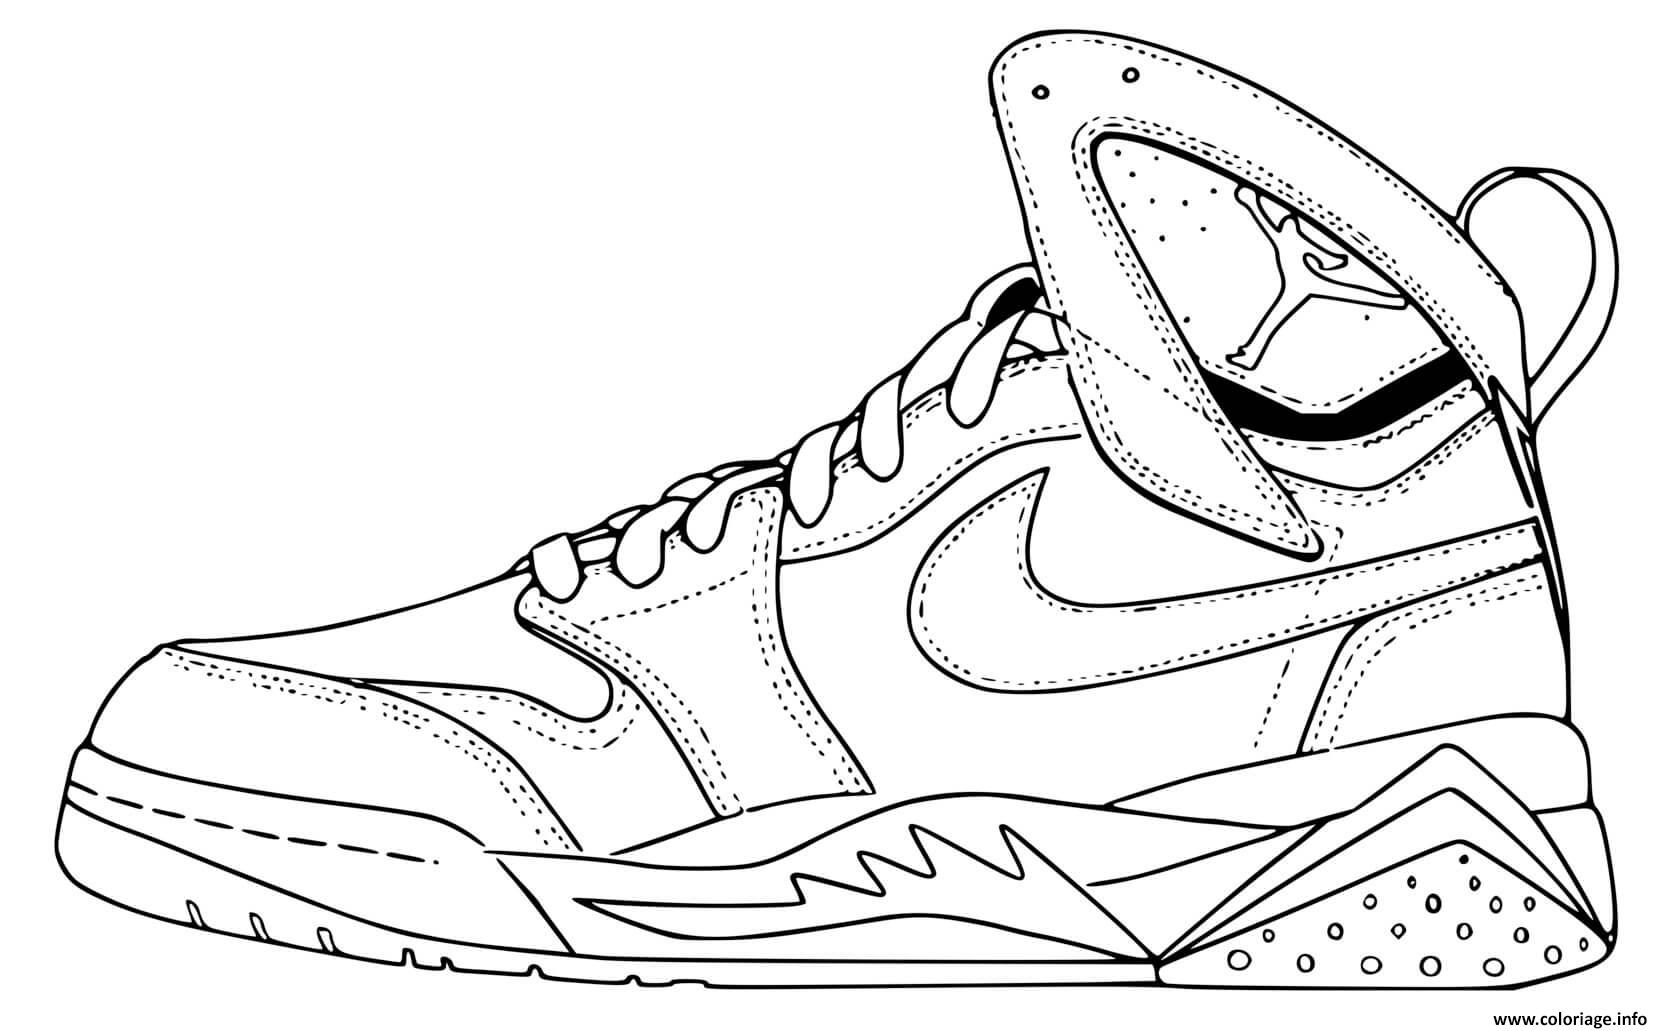 Printable Coloring Pages Of Nike Shoes - Free Printable Templates